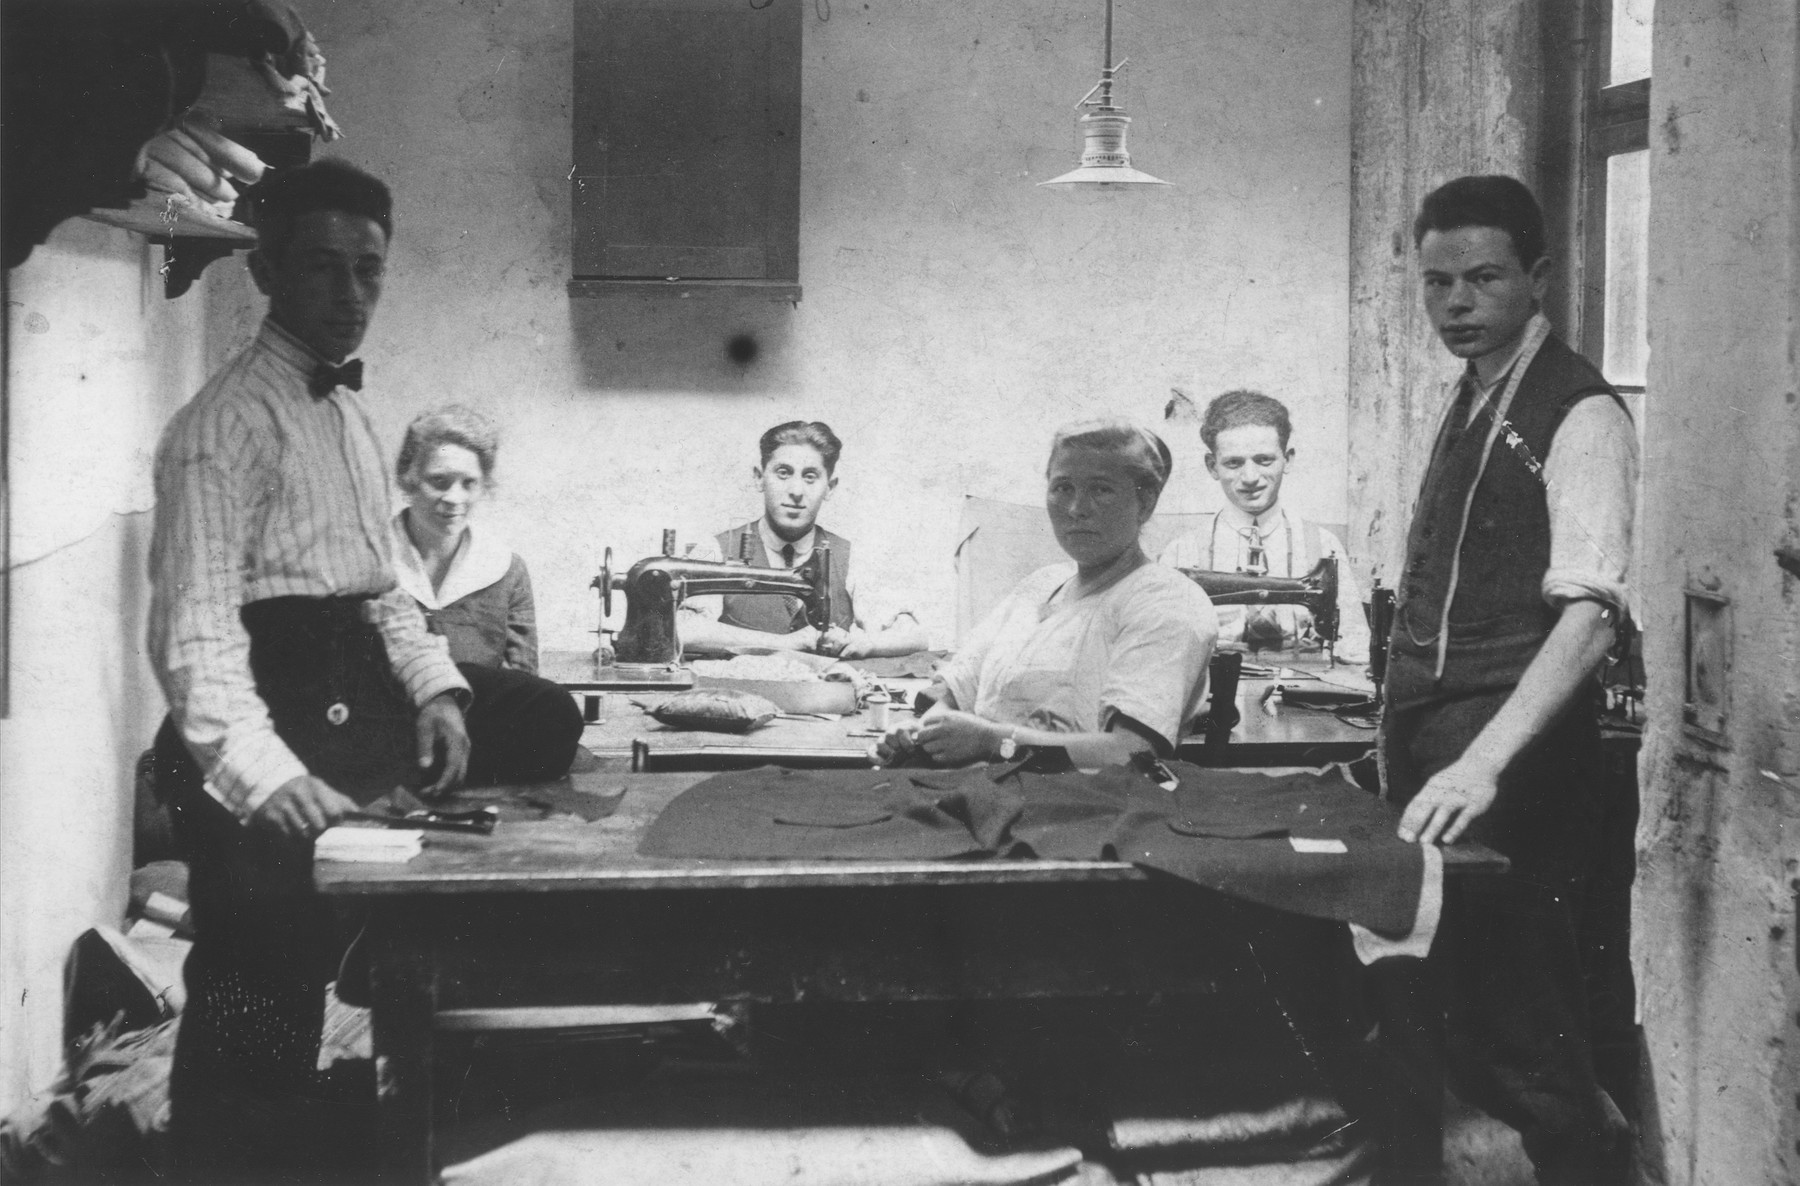 Jews at work in a tailor shop owned by Natan Wolf Lewkowicz in Bedzin, Poland.

Among those pictured is Natan Wolf Lewkowicz, the donor's father.